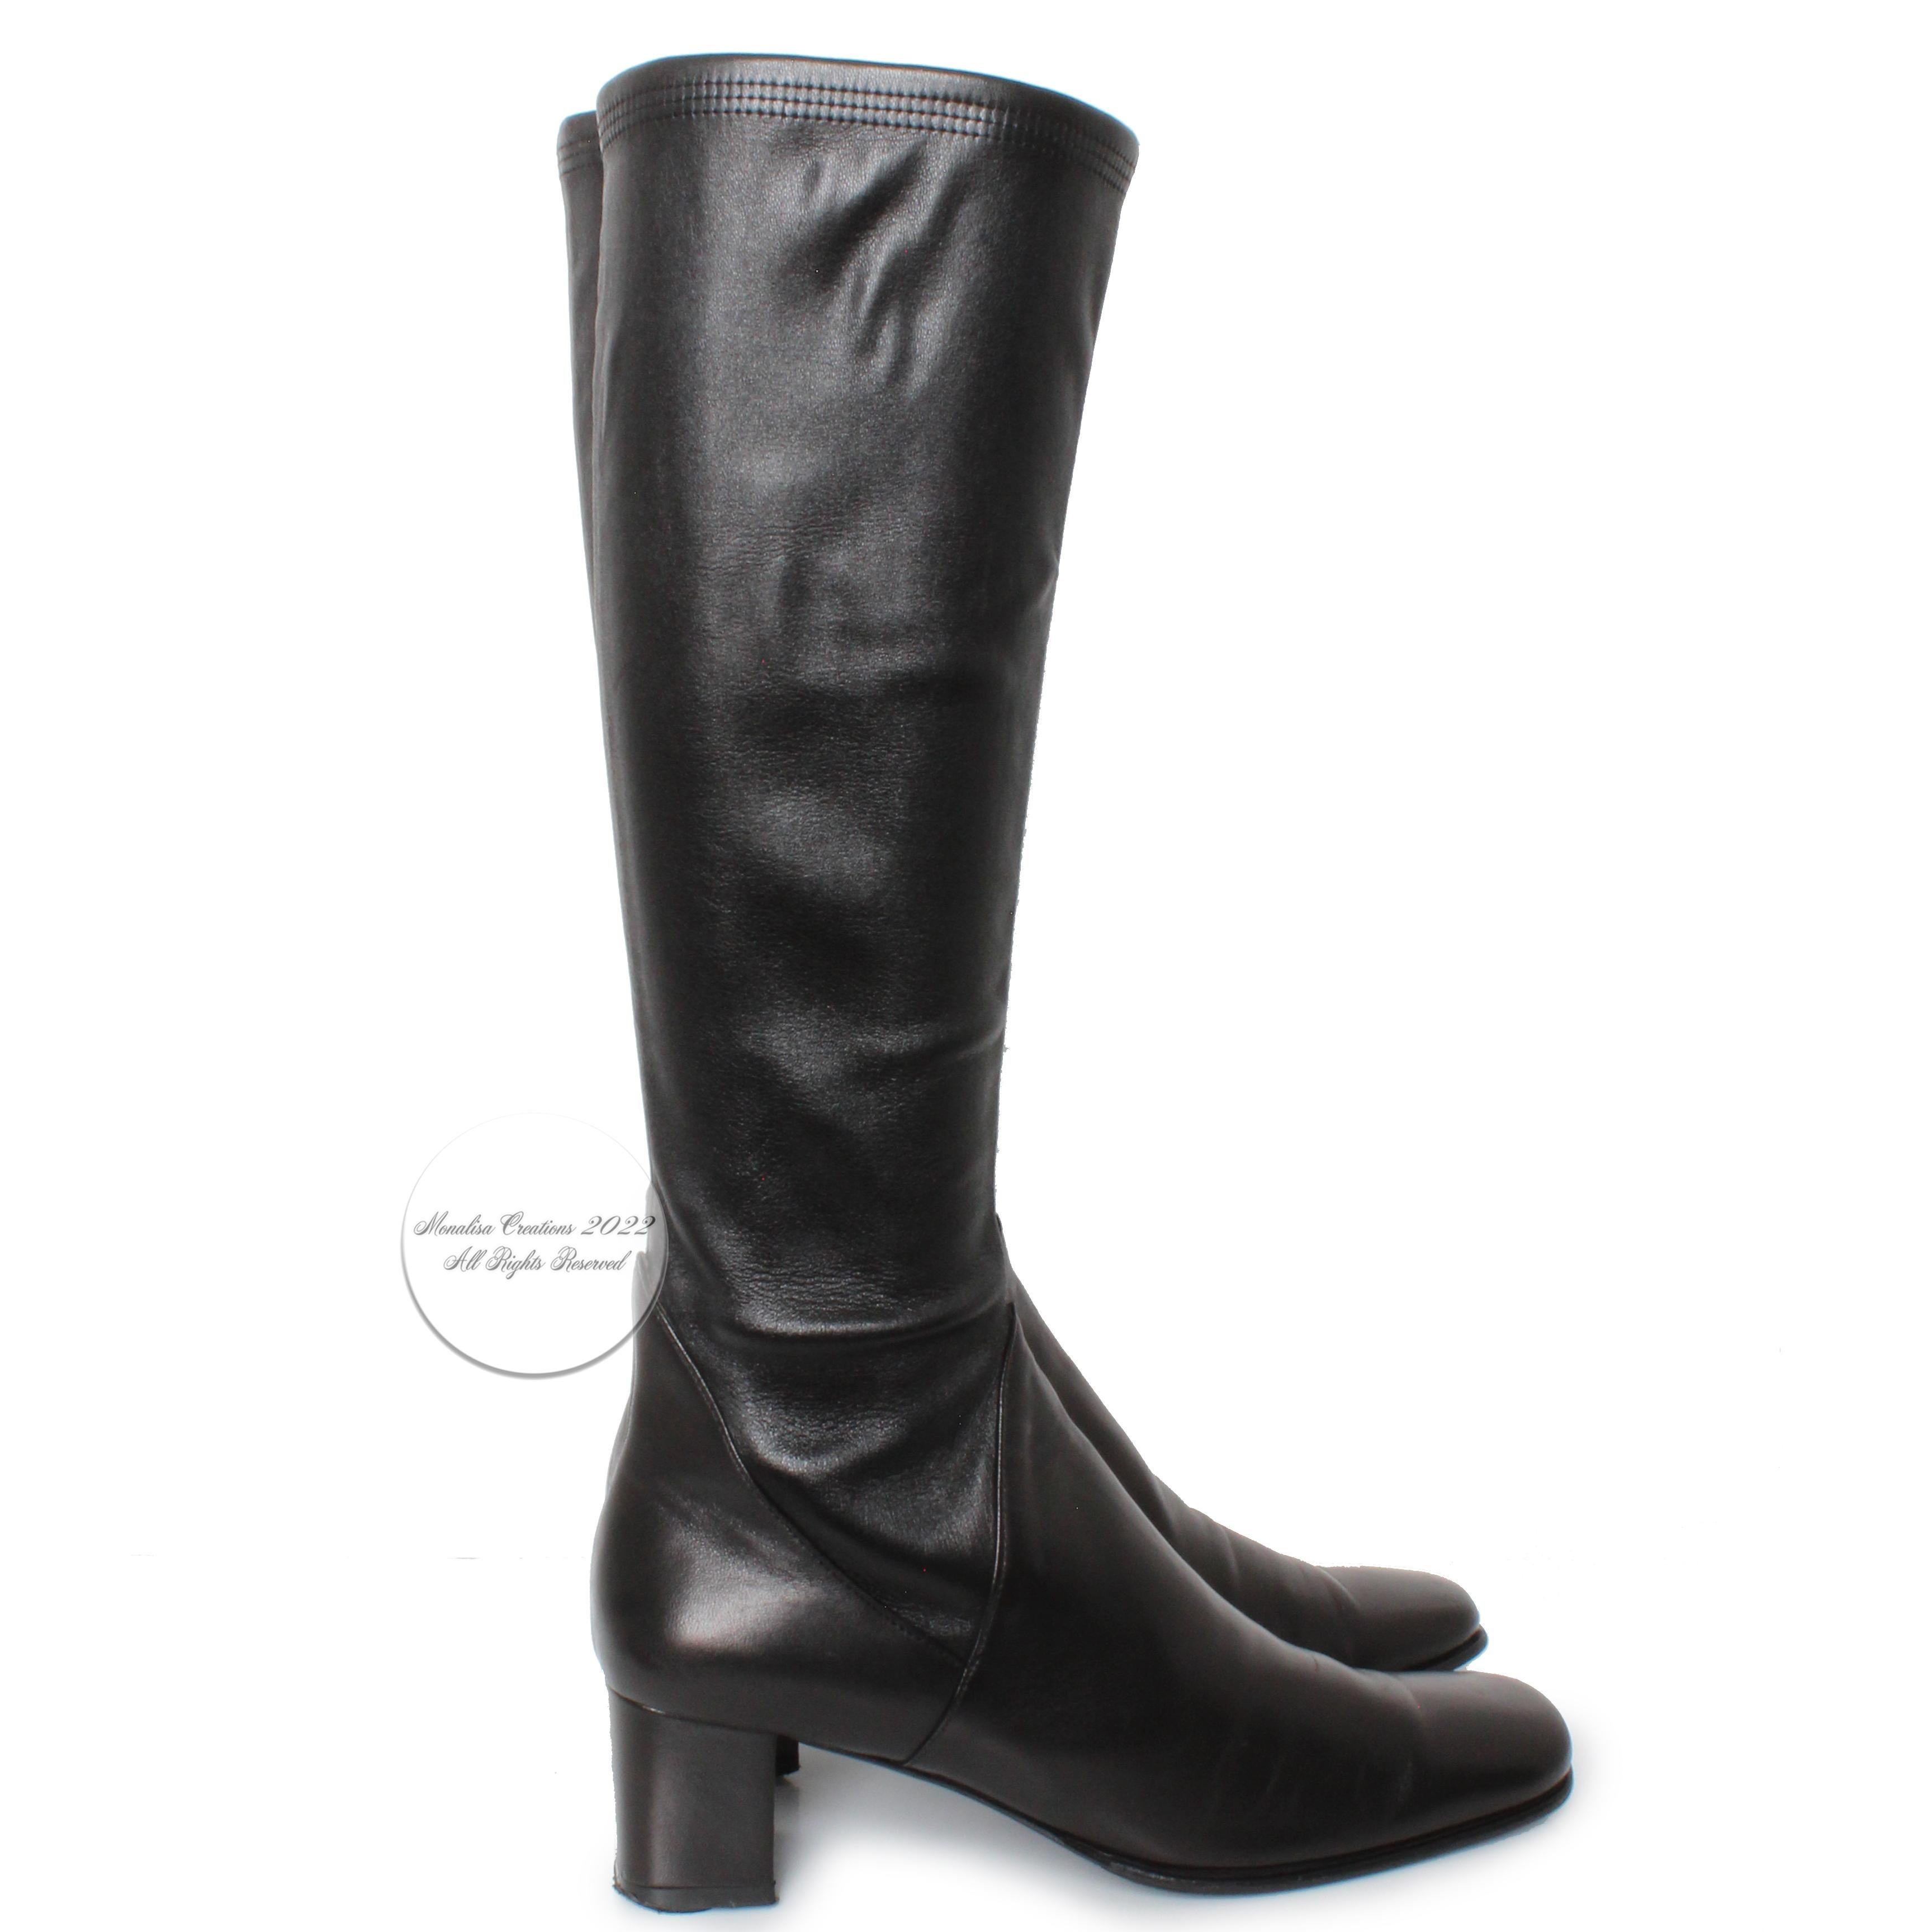 Salvatore Ferragamo black leather boots with stretch calves, likely made in the 90s.  Classic block heel boots that are easy to style and comfortable to wear!  The size stamp is faded on these boots, however we believe they are a size 8.